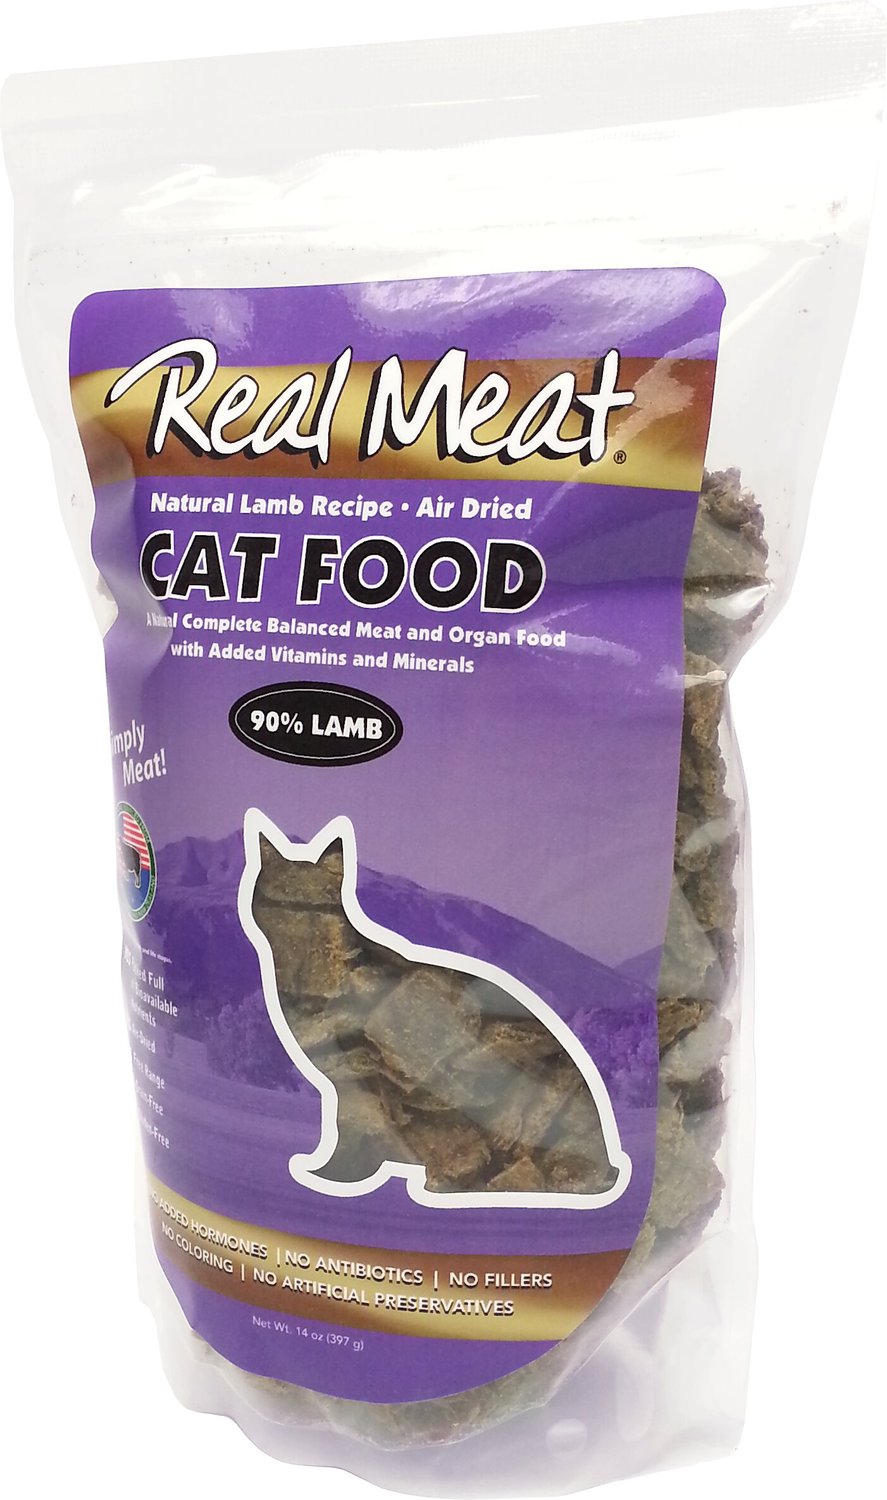 THE REAL MEAT COMPANY 90 Lamb GrainFree AirDried Cat Food, 14oz bag